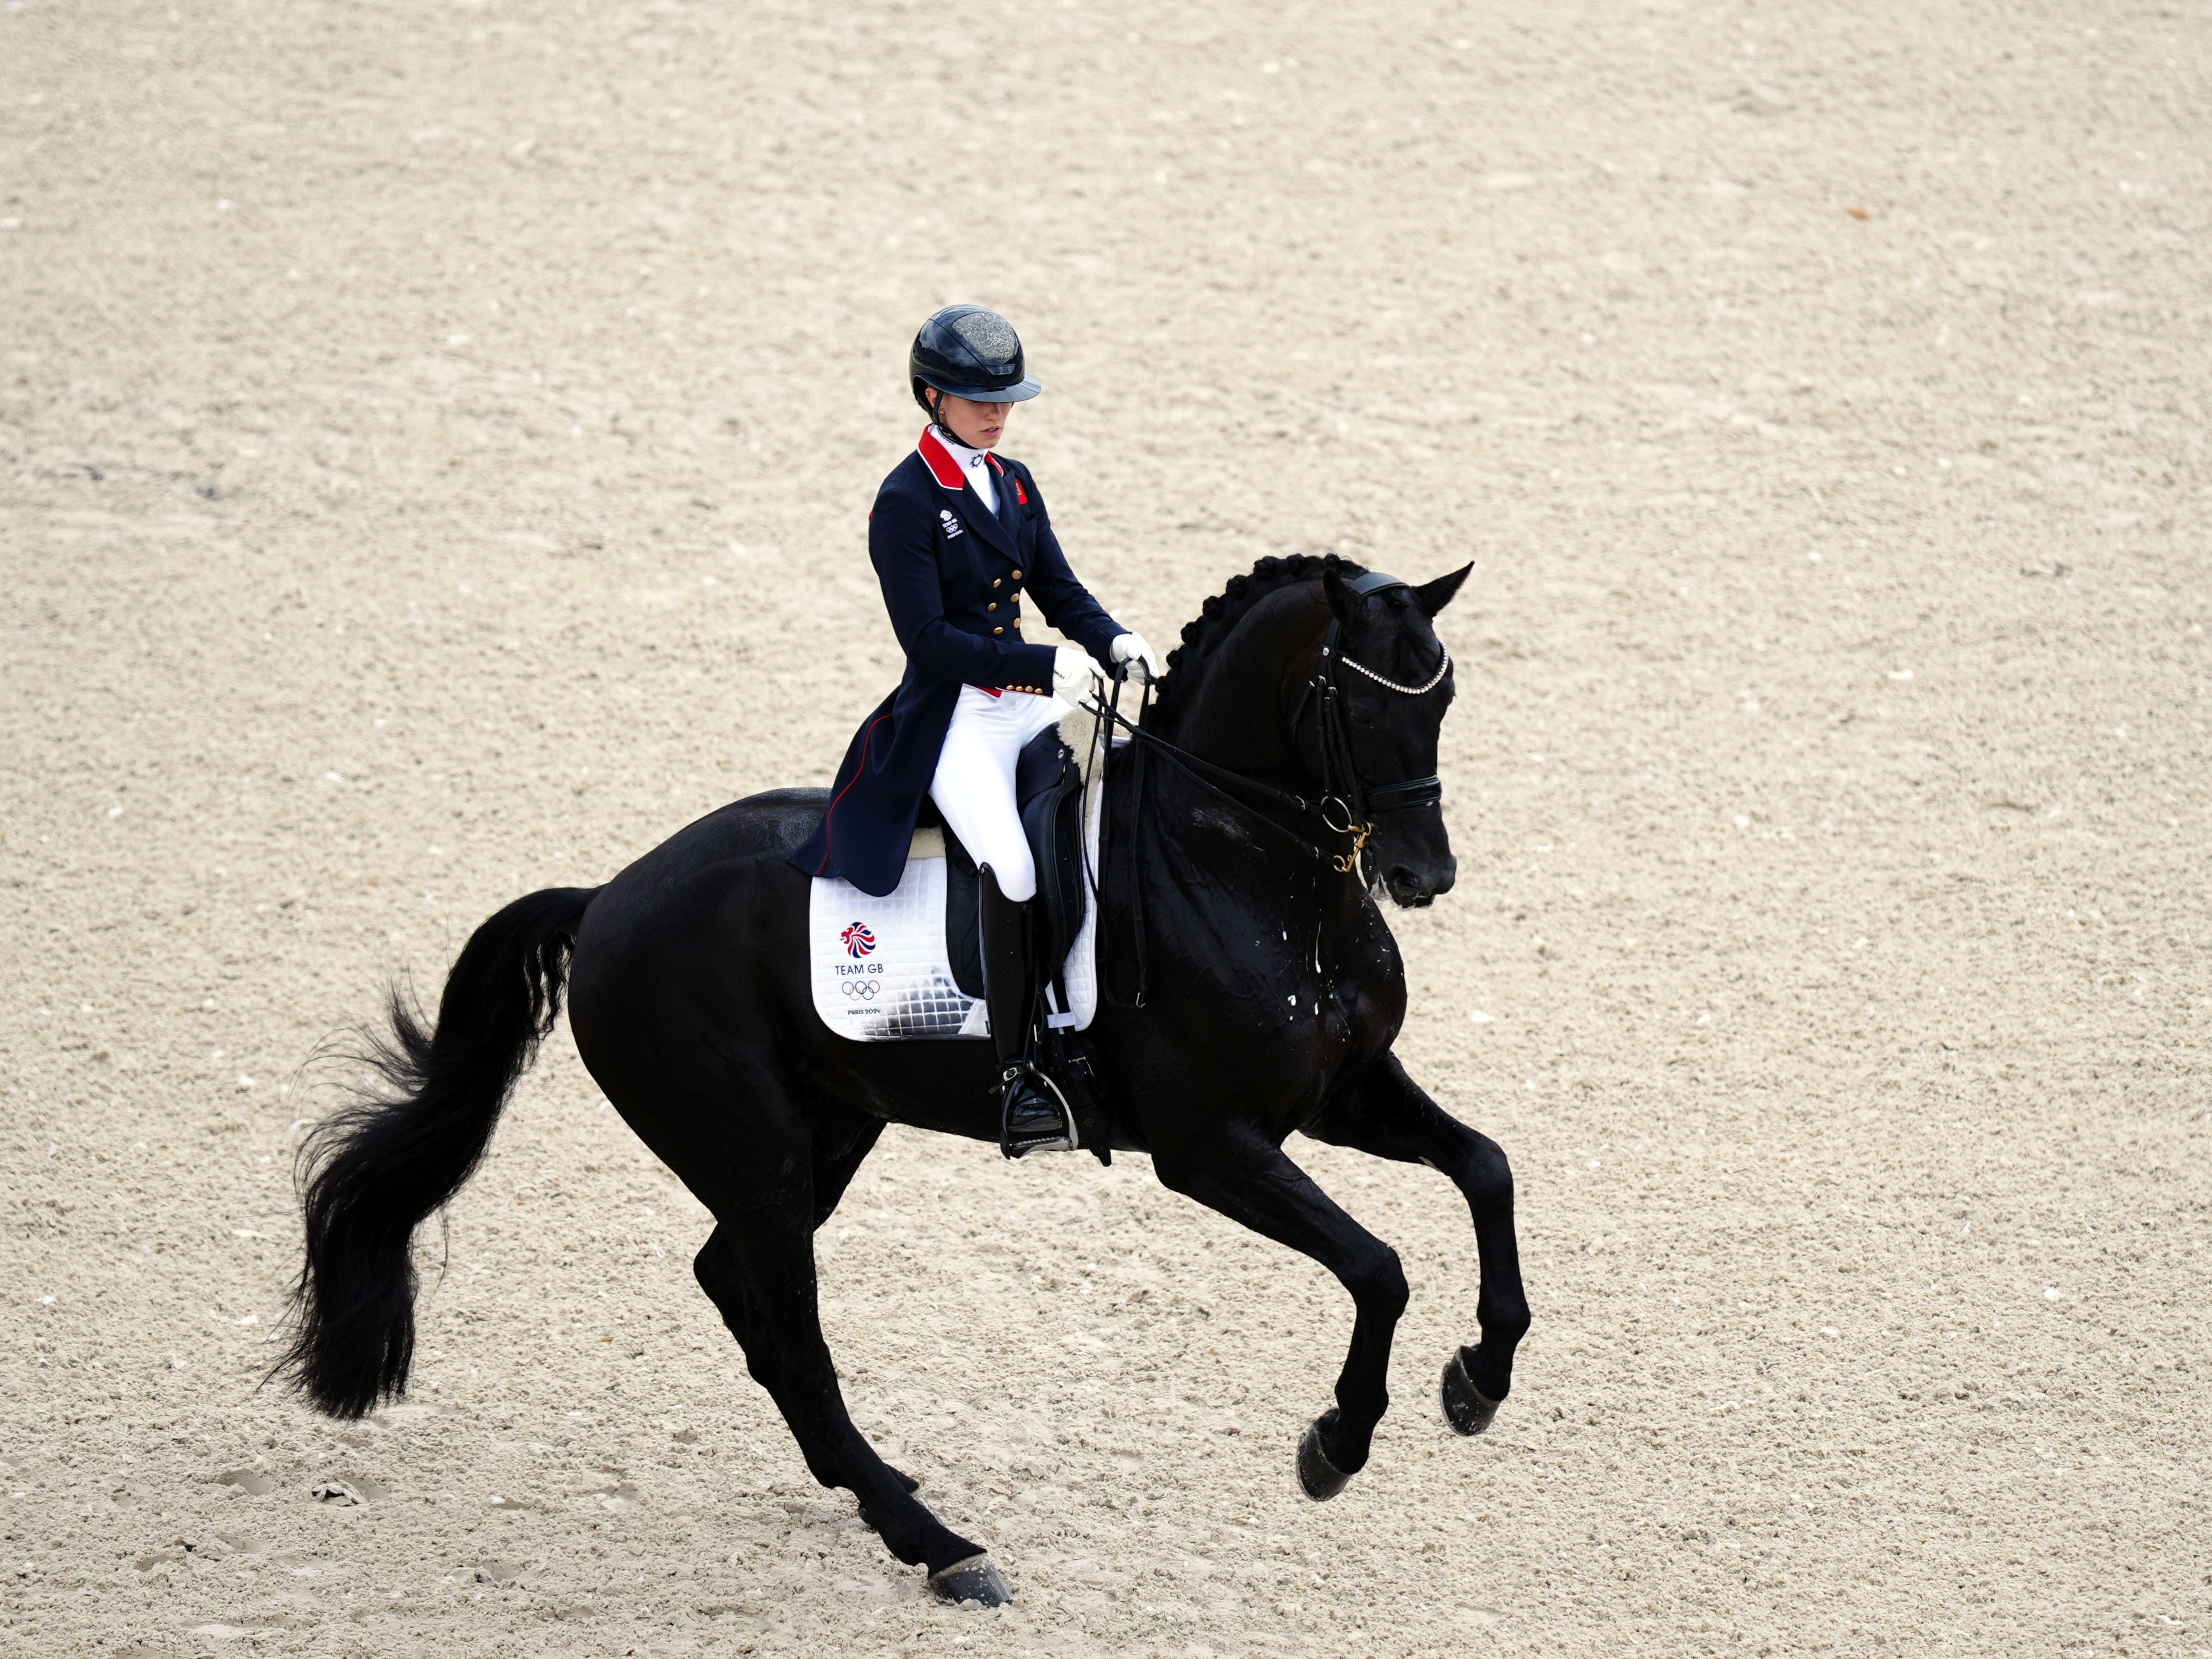 Carl Hester, Charlotte Fry and Becky Moody take team dressage bronze for GB